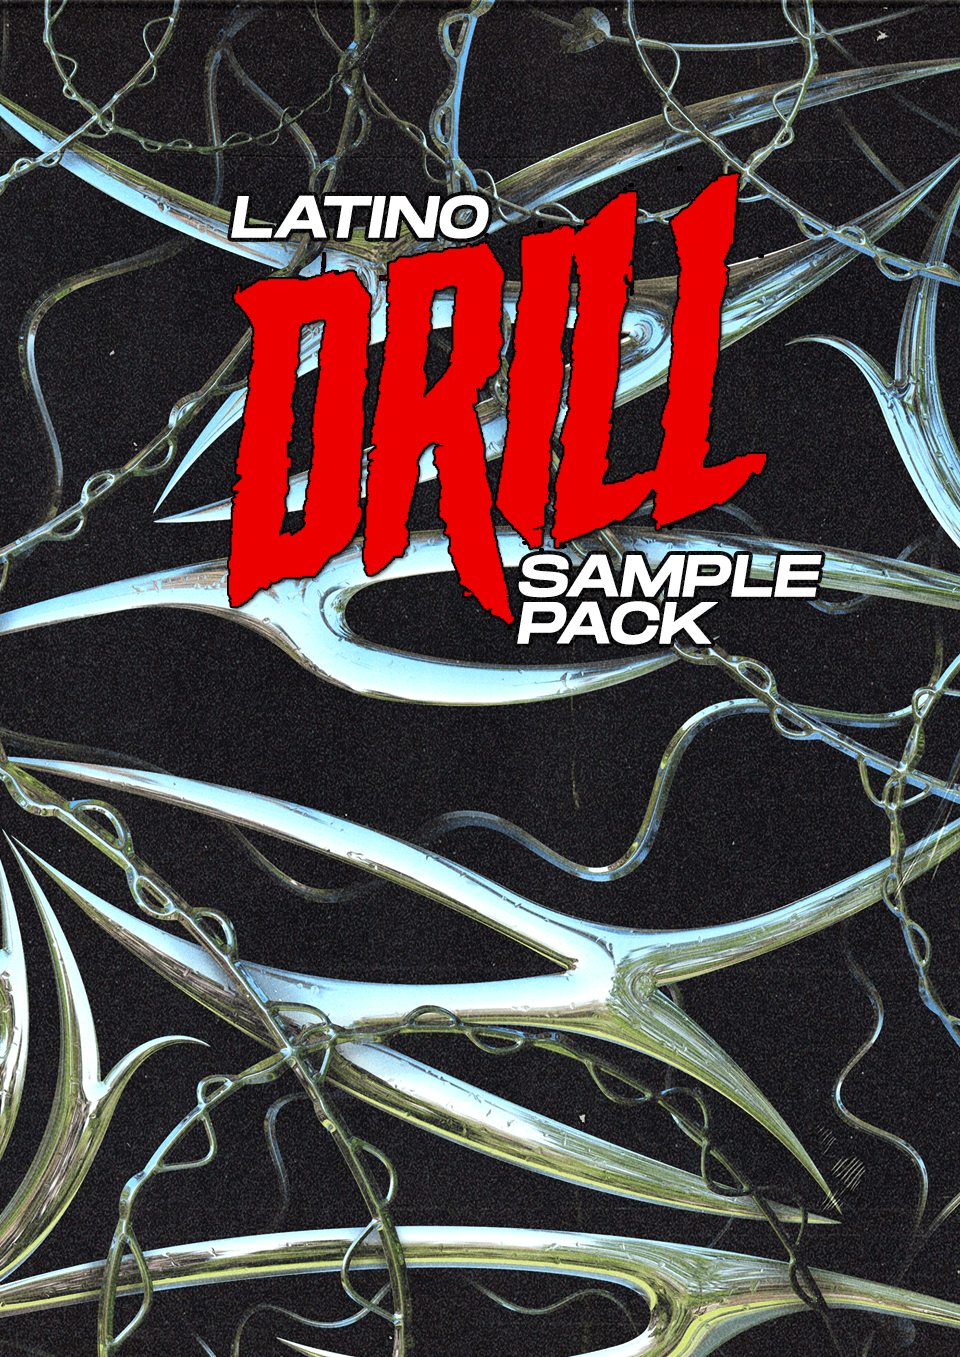 Kickstart your next project with a sample from our Latino Drill Sample Pack. Fresh collection of hit Drill Samples. including beautiful samples, you need to produce world-class Drill ! One of the most popular genres of the year. With this collection, we deliver 30 Afrobeat Samples. 100% royalty-free.